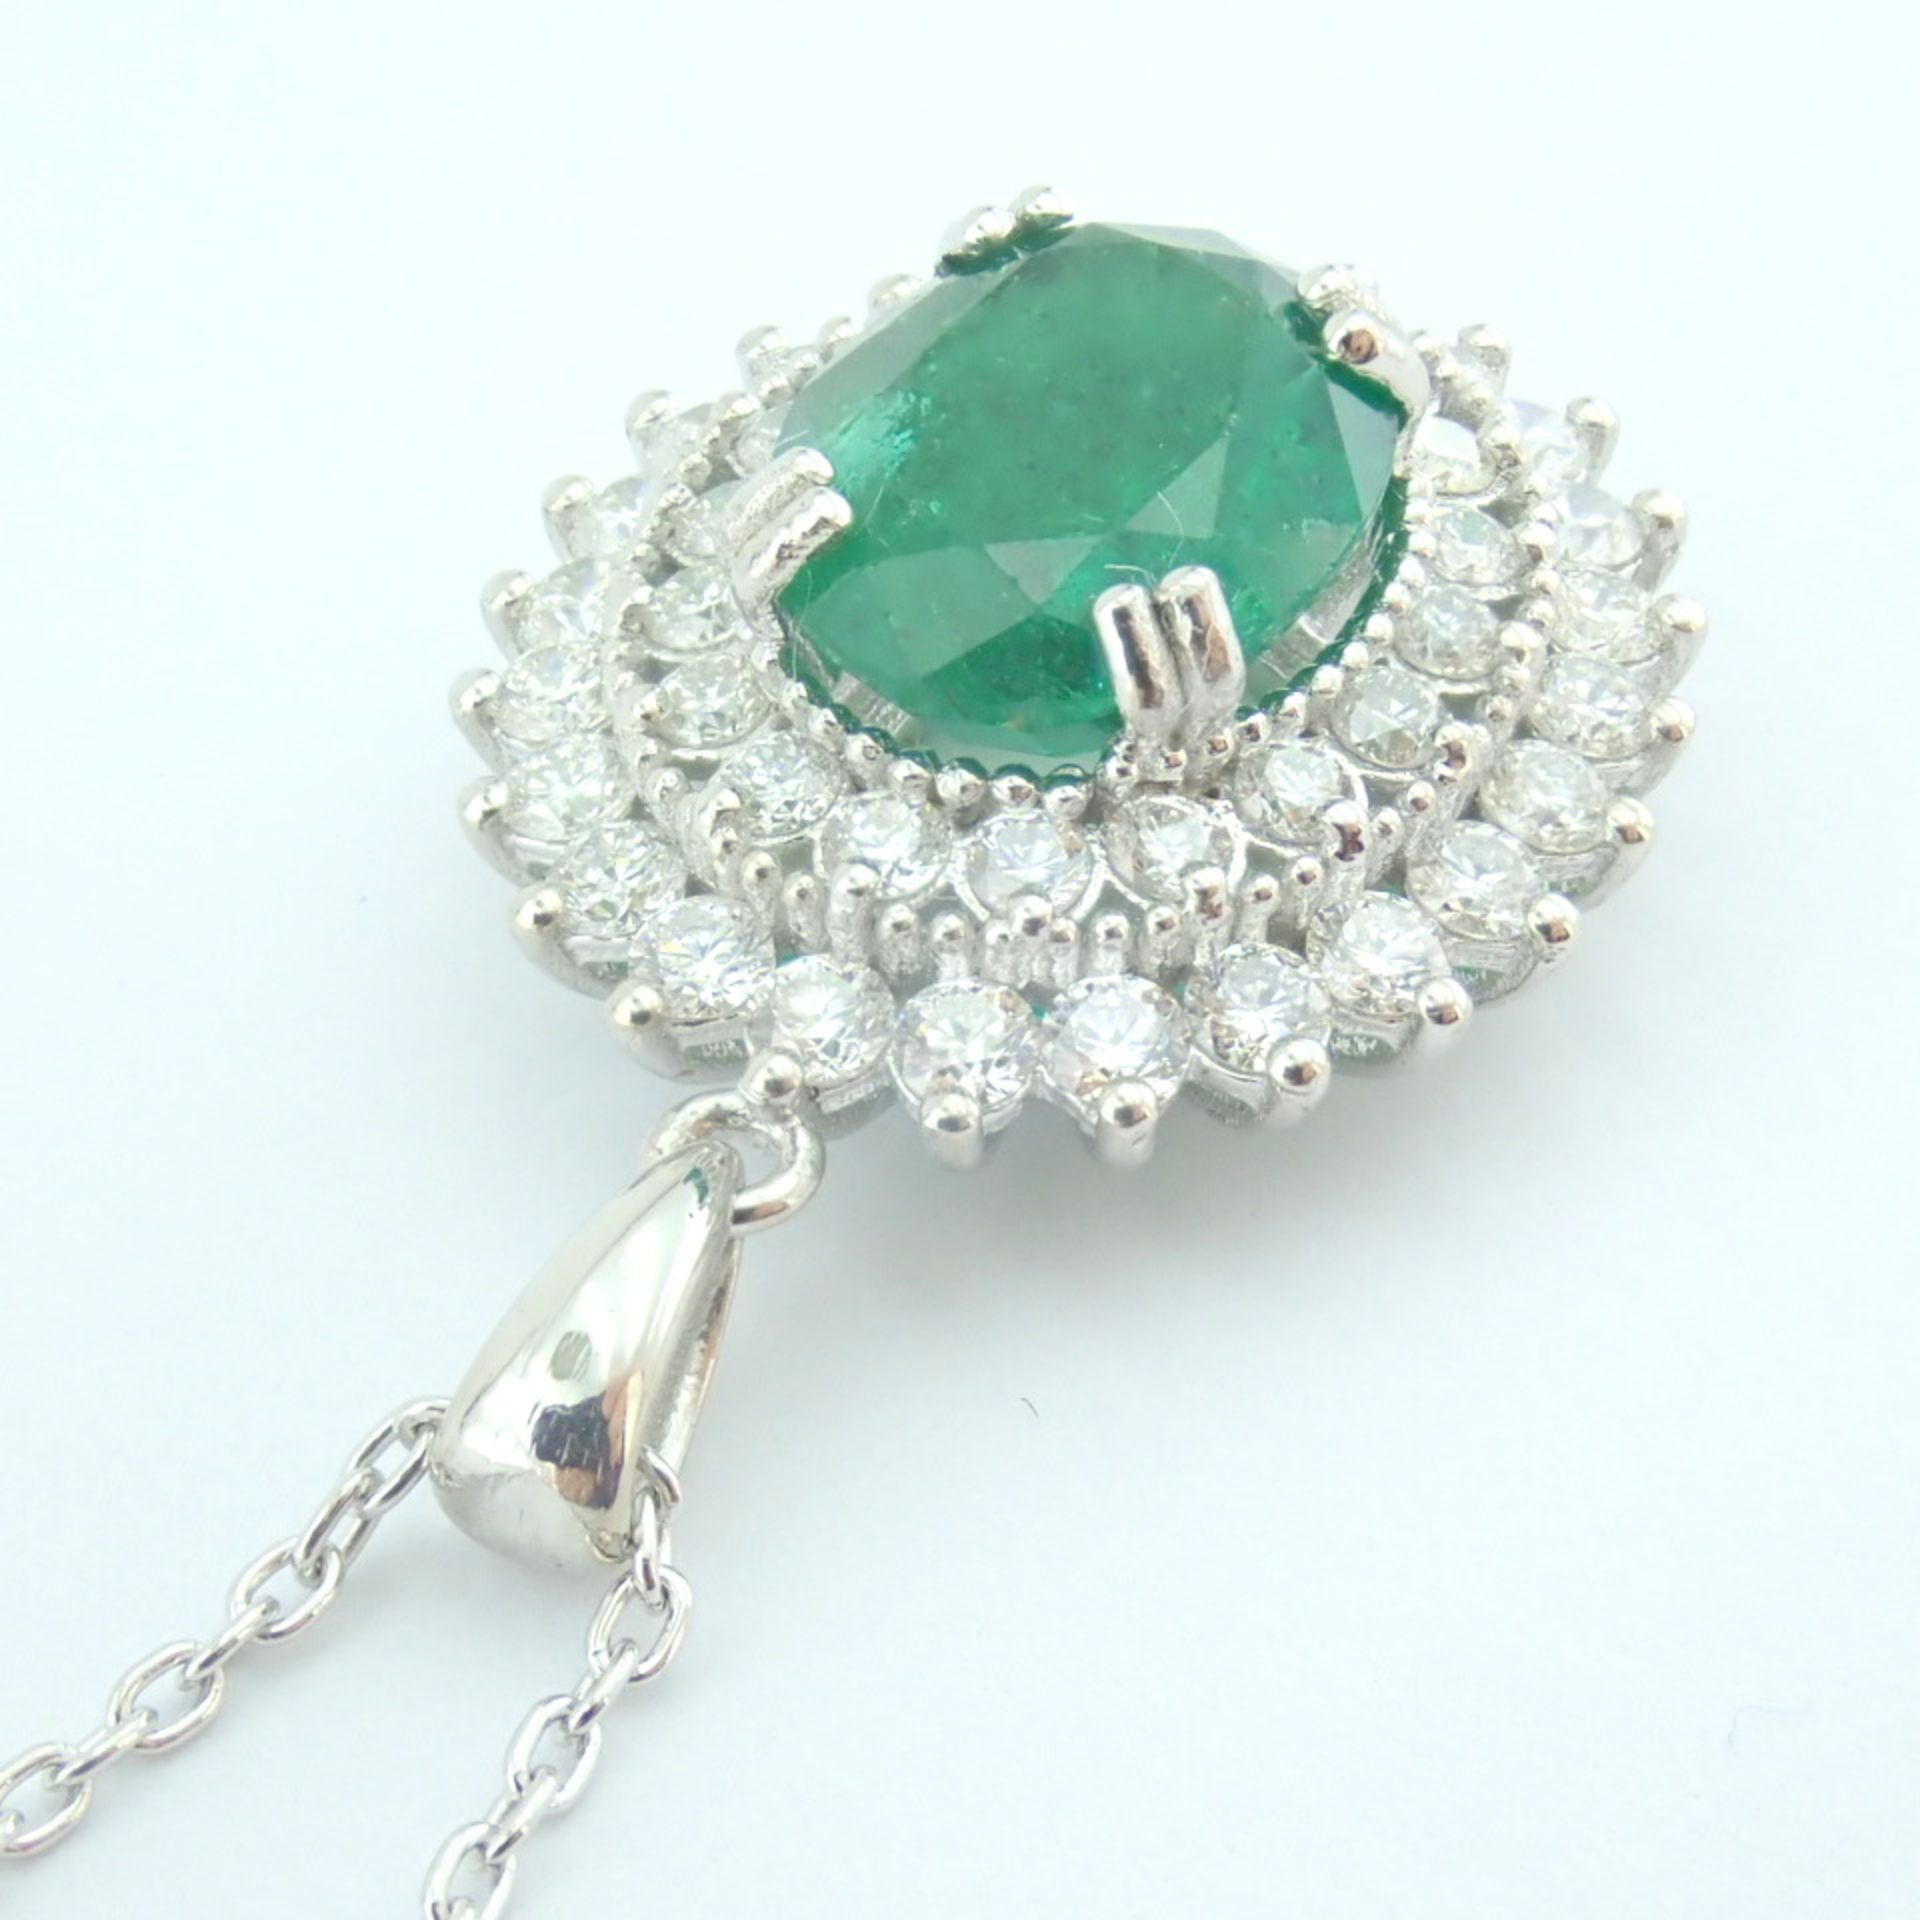 Certificated 14K White Gold Diamond & Emerald Necklace - Image 6 of 11